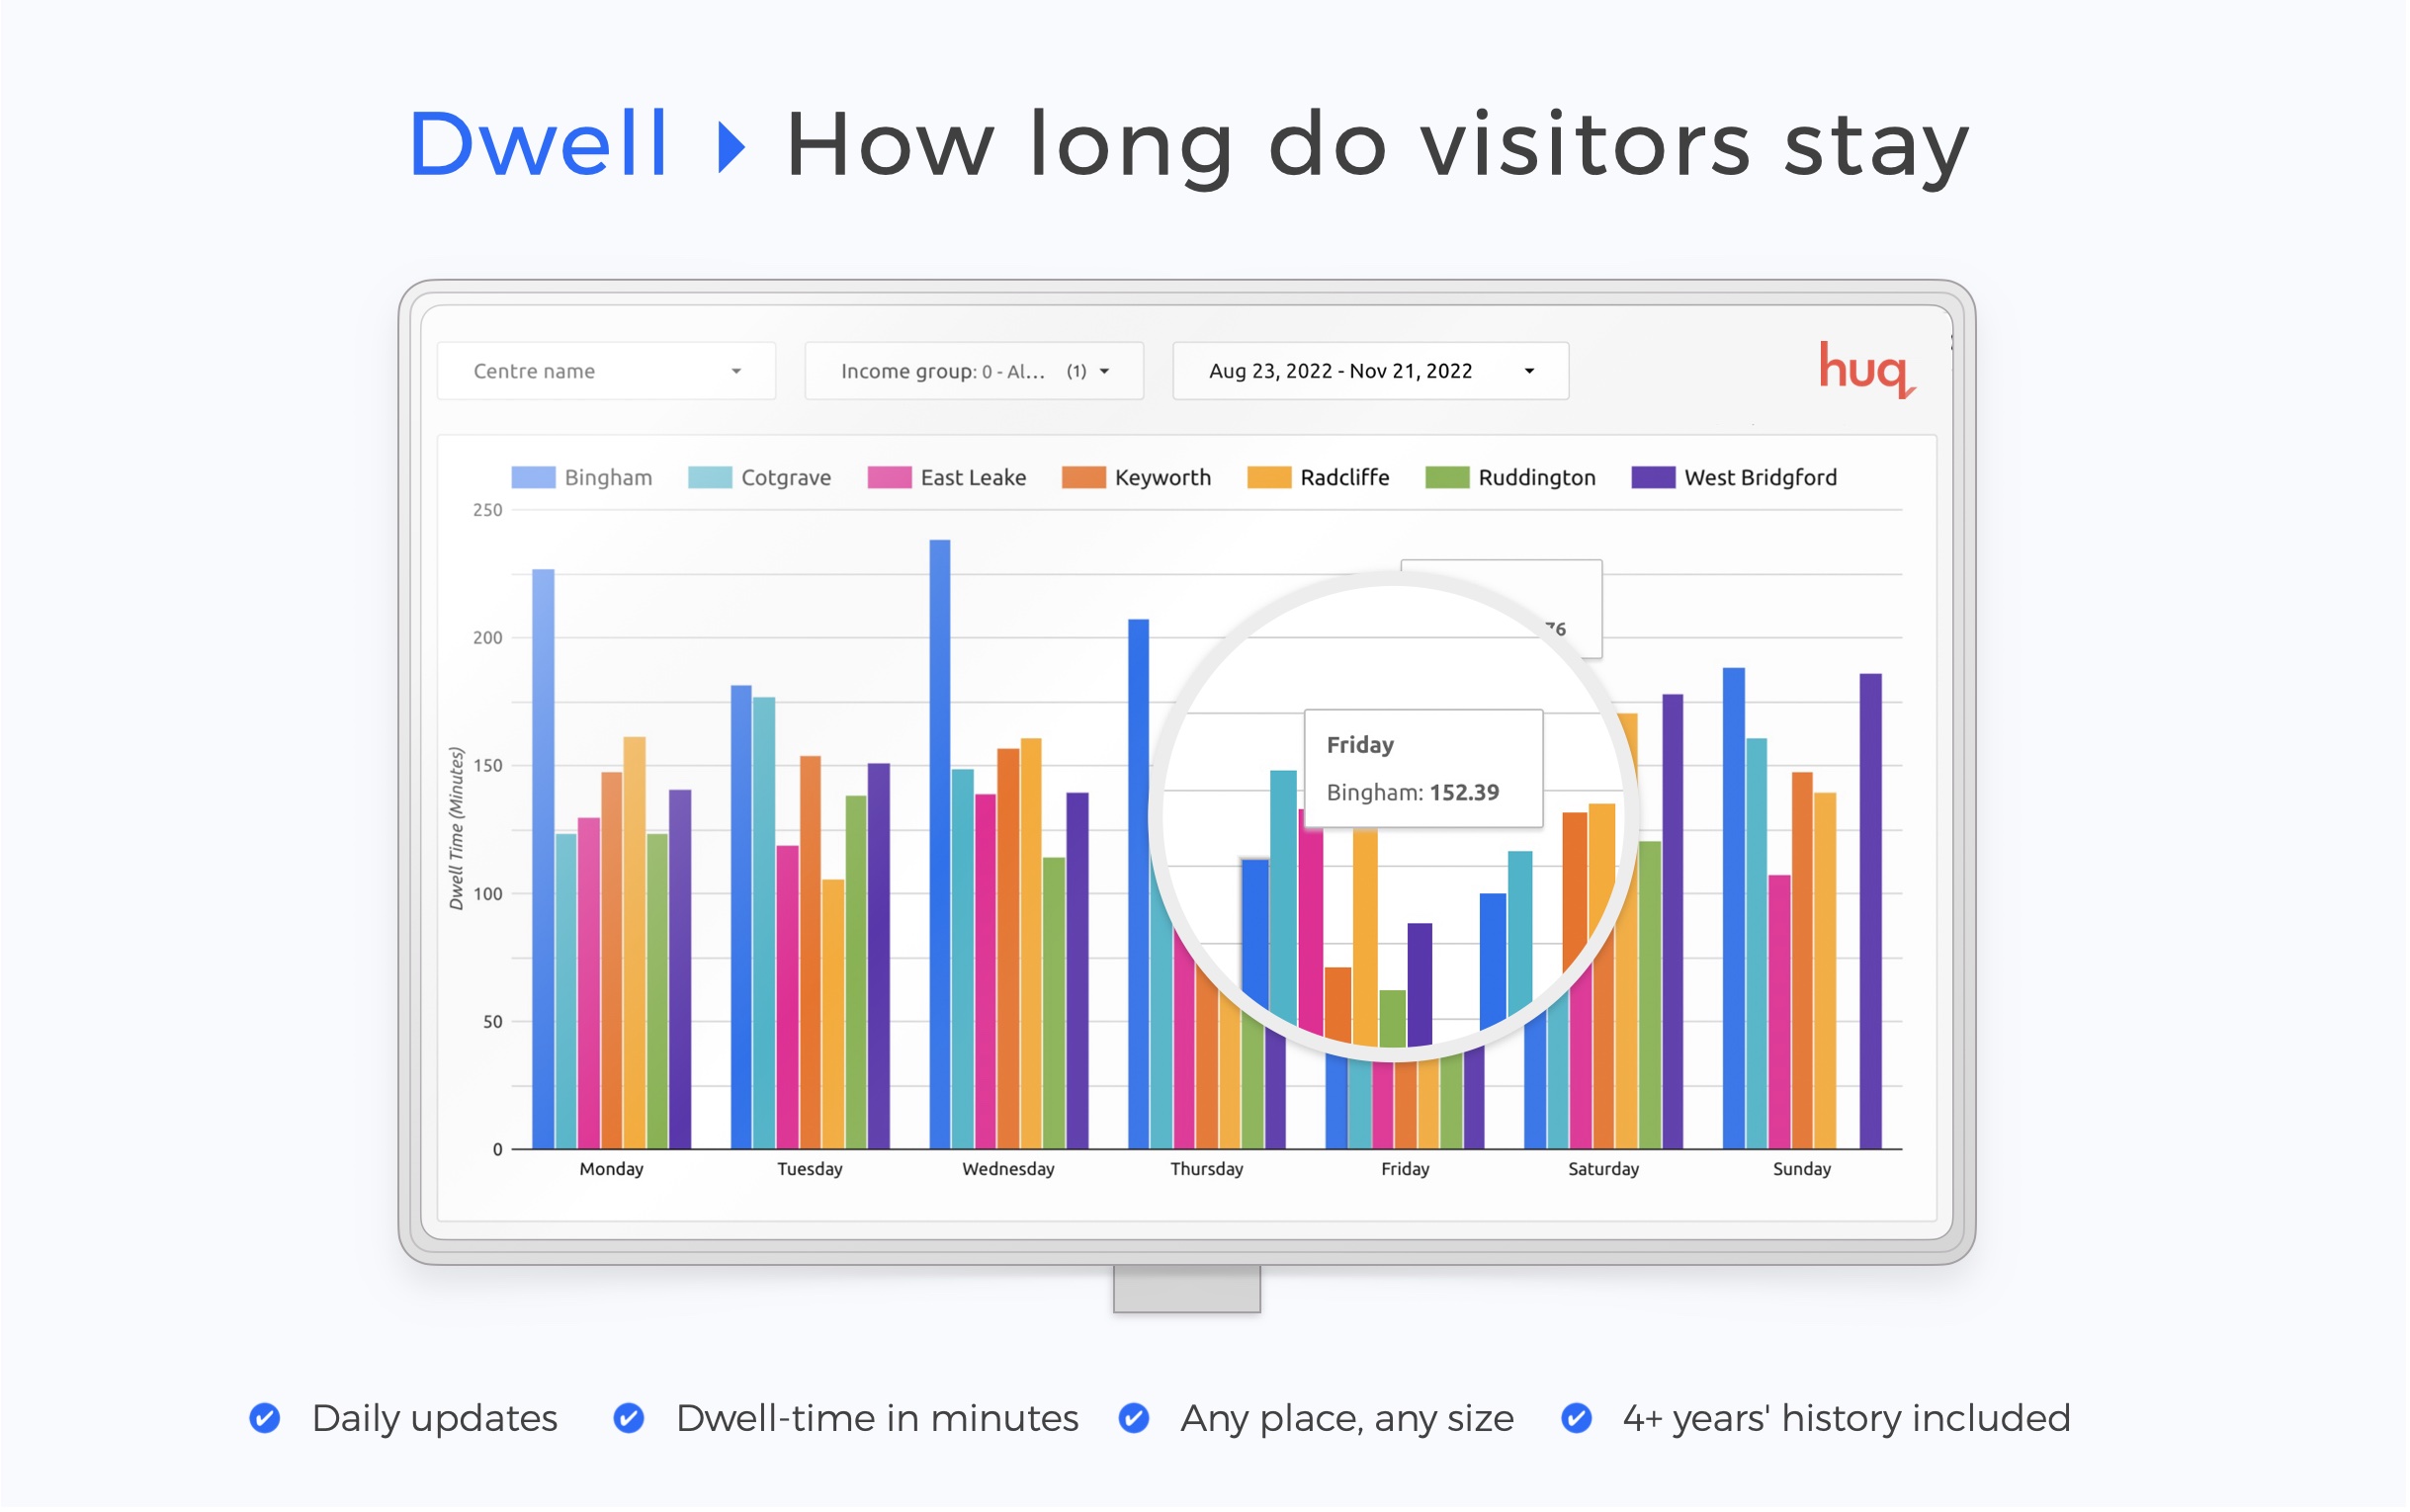 Dwell-time measures the time that visitors spend in an area per trip. Get the output in minutes, updated everywhere on a daily basis! High dwell-time is indicative of high place performance. Find out what places mean to people with Dwell-time insights.